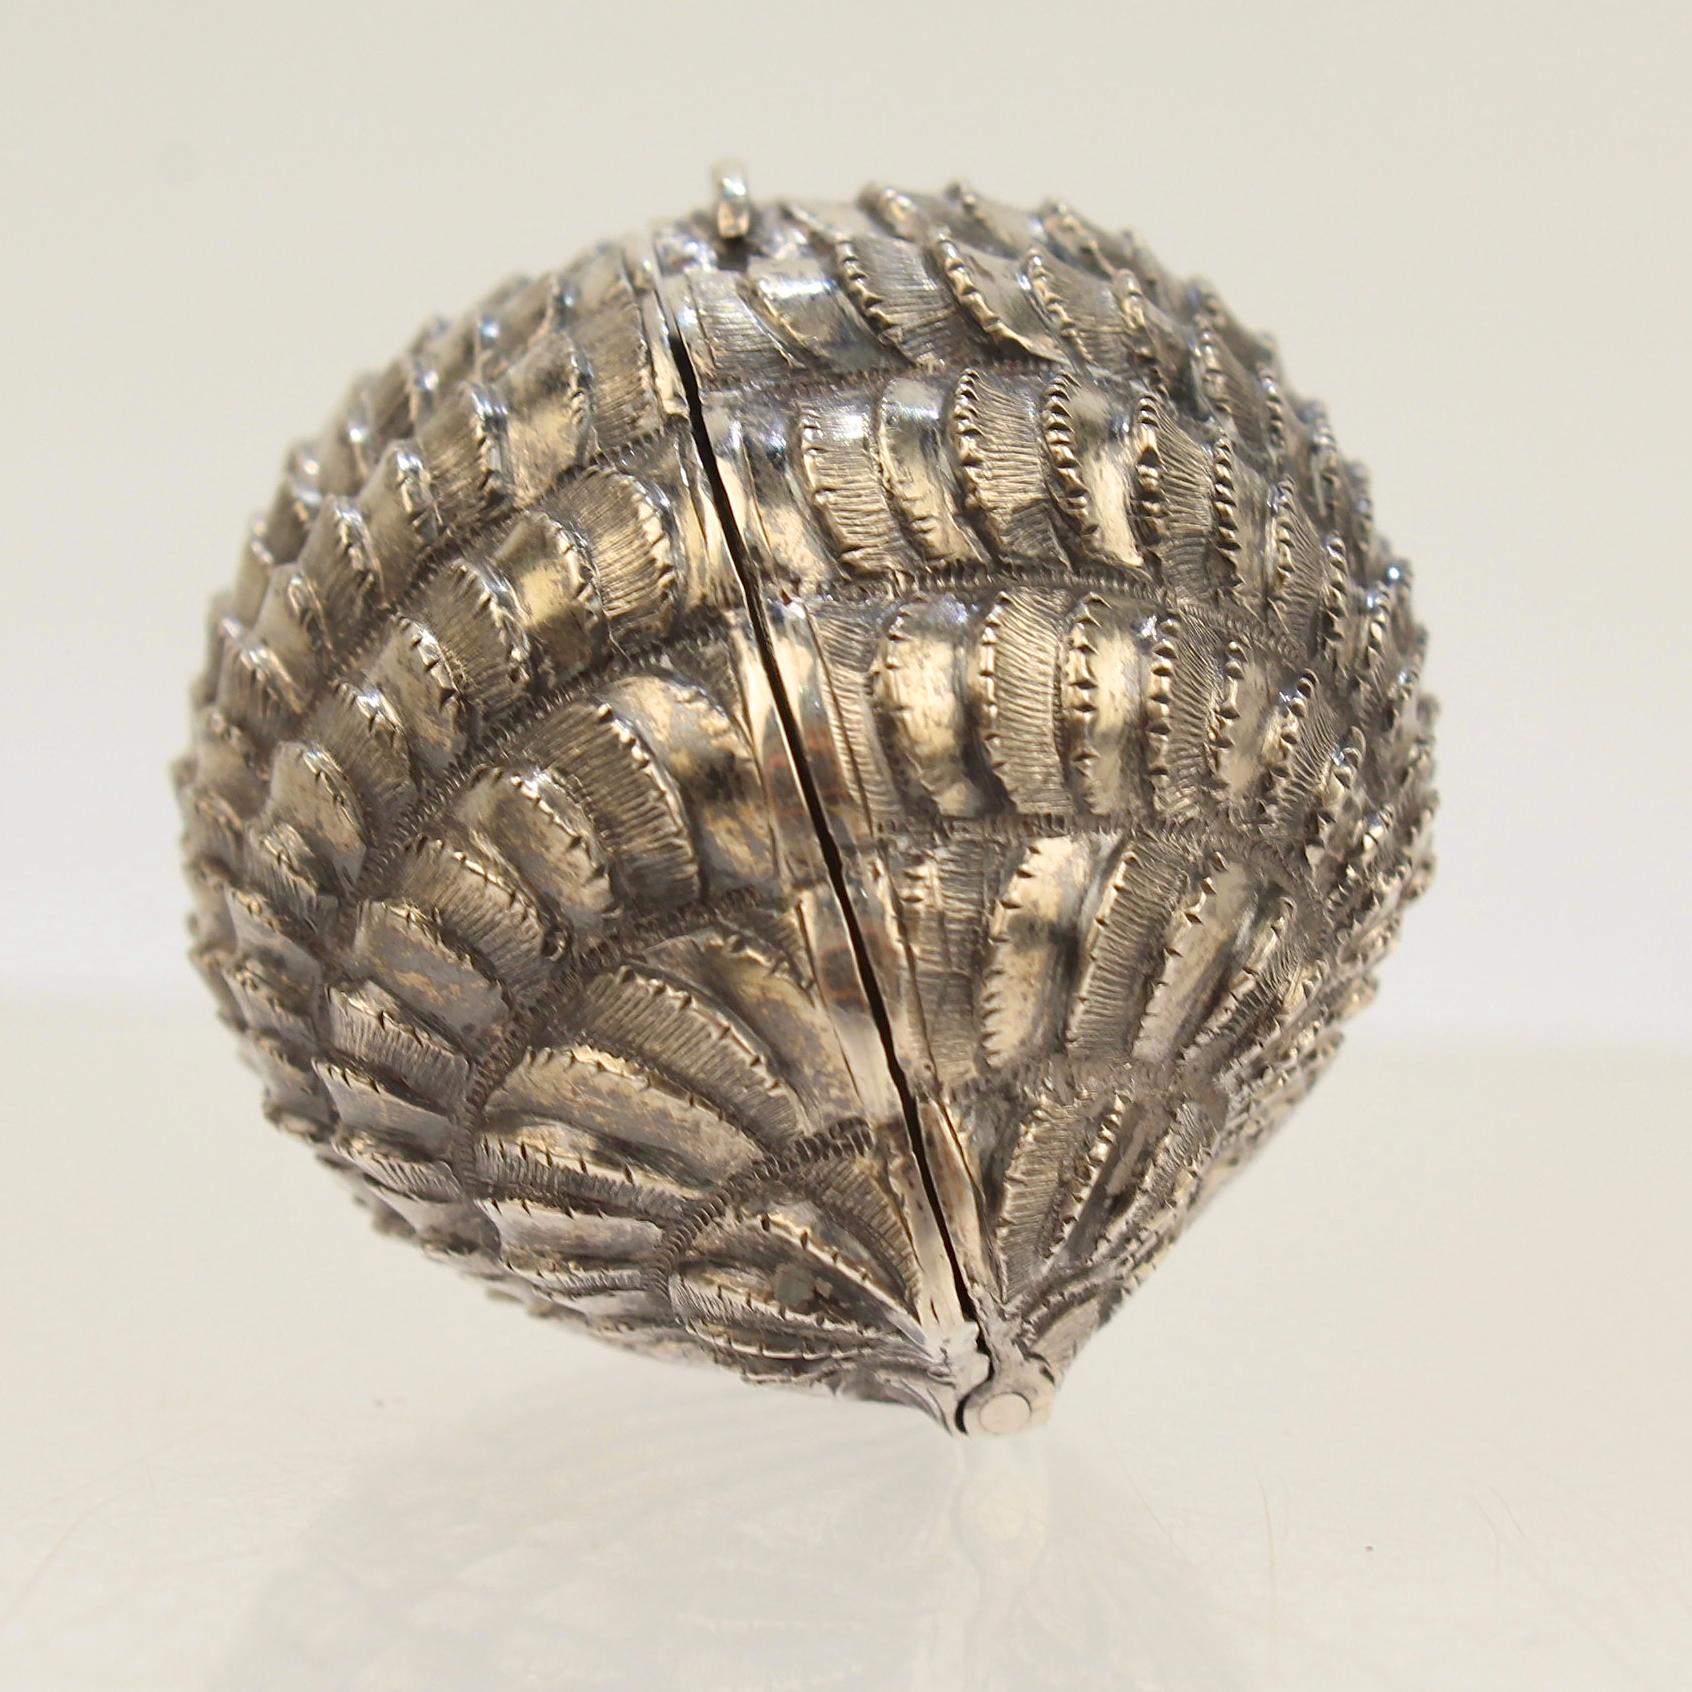 A very rare English sterling silver nutmeg grater.

It is modeled as a full bodied scallop seashell and has a cover that reveals a hinged steel grill or grater.

The interior rim bears hallmarks for Hilliard & Thomason.

A very fine addition to any